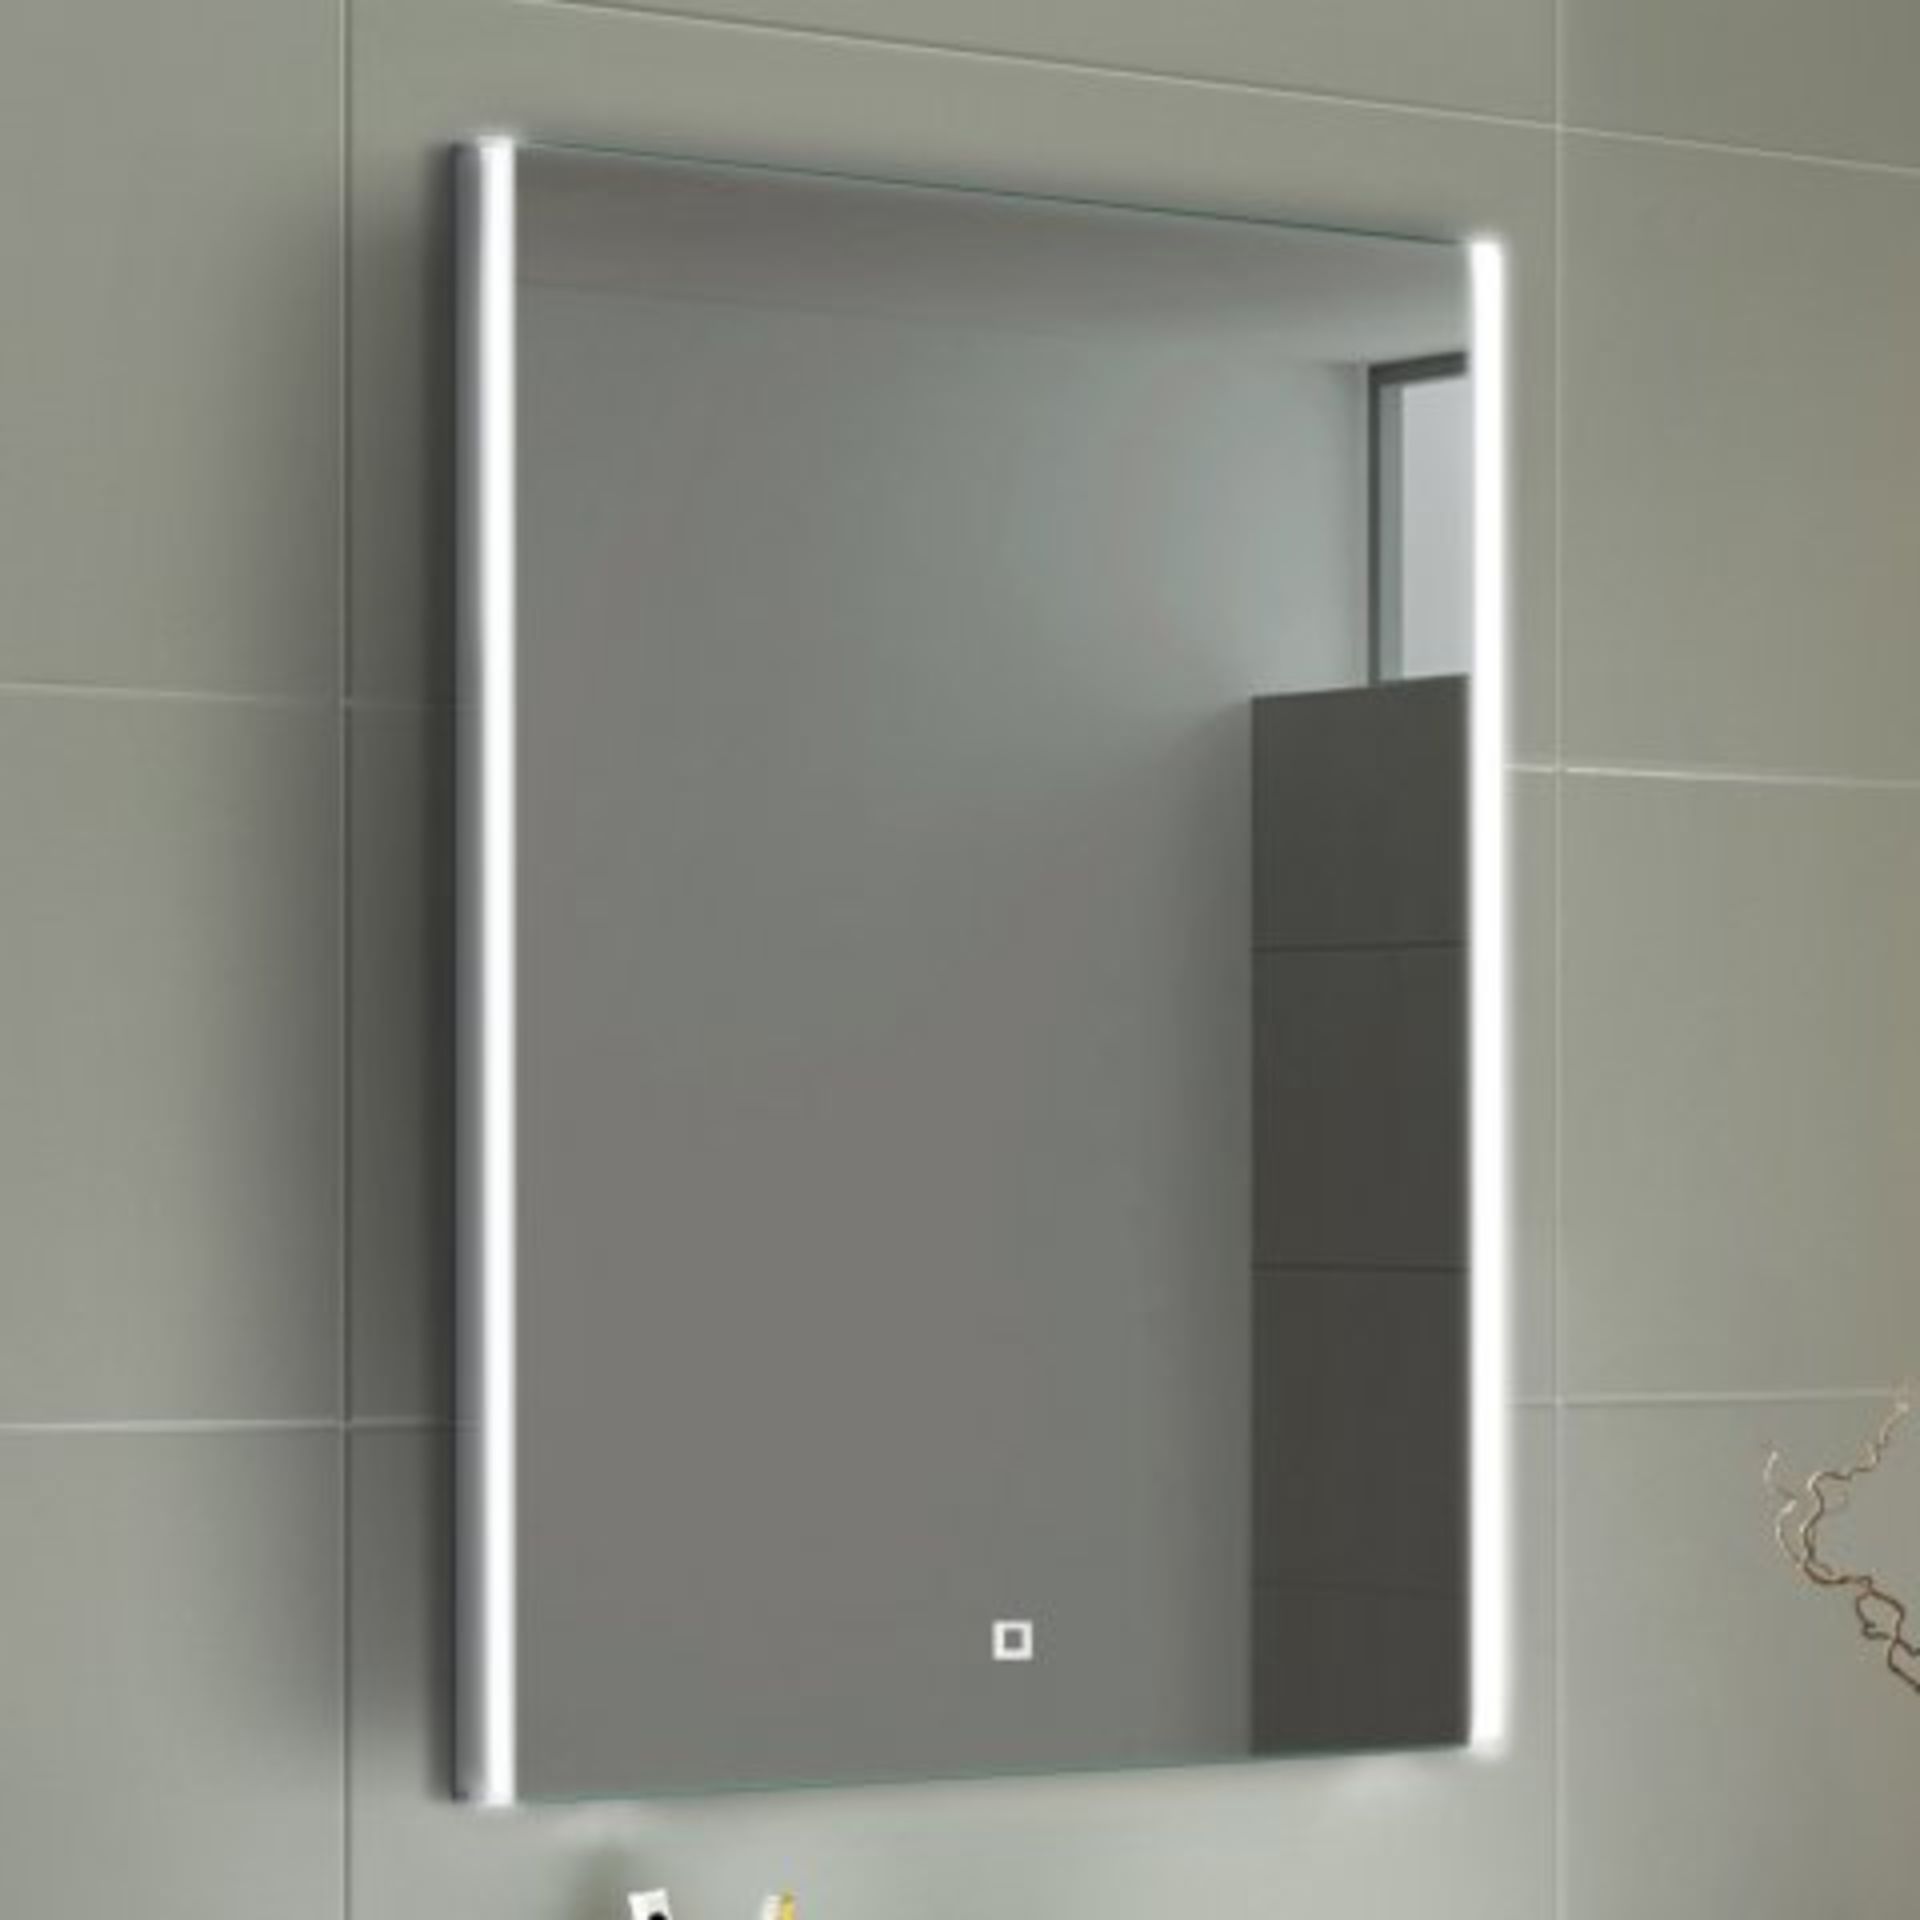 (P165) 700x500mm Lunar Illuminated LED Mirror - Switch Control. RRP £349.99. Our Lunar range of